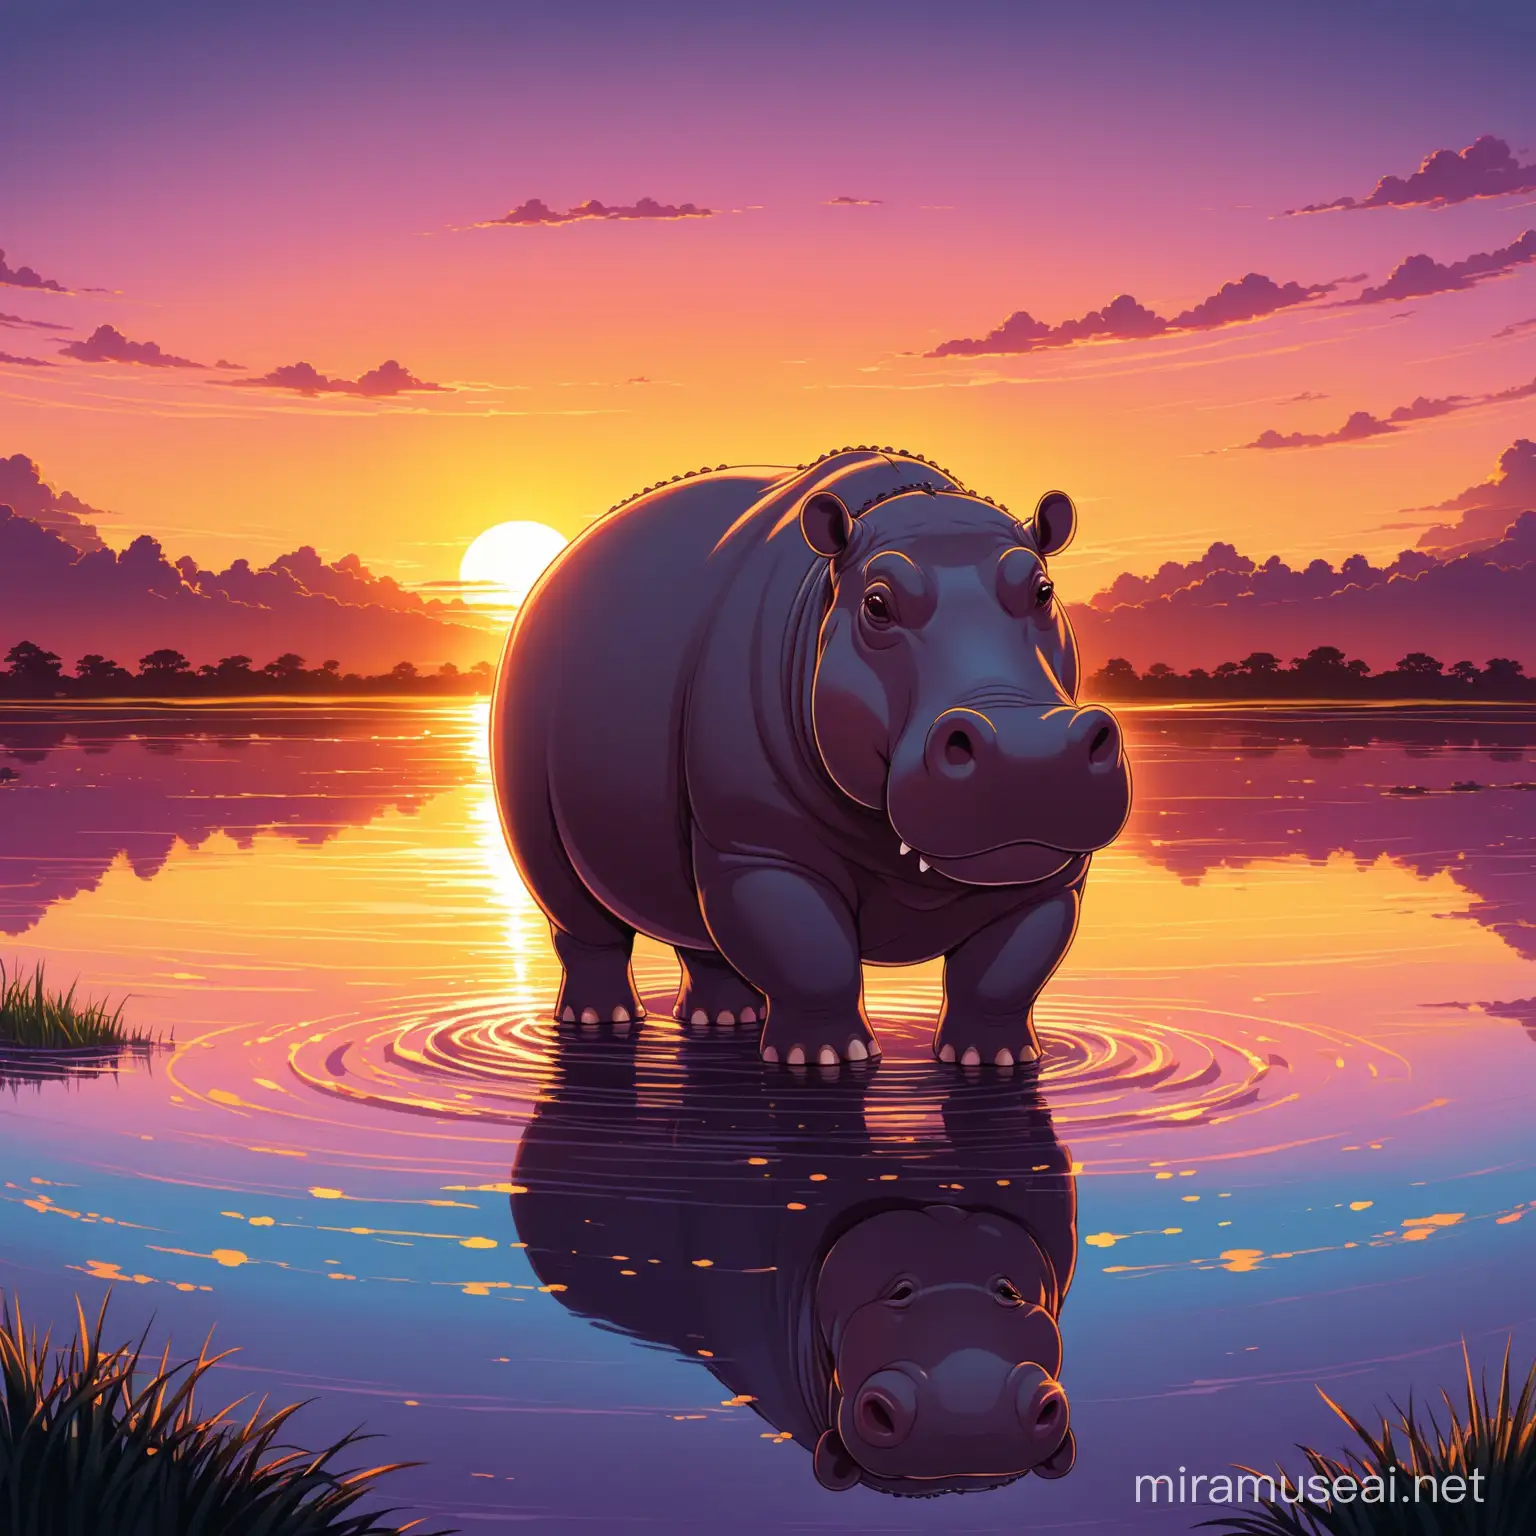 Hippo, sunset 
big in center , twielight